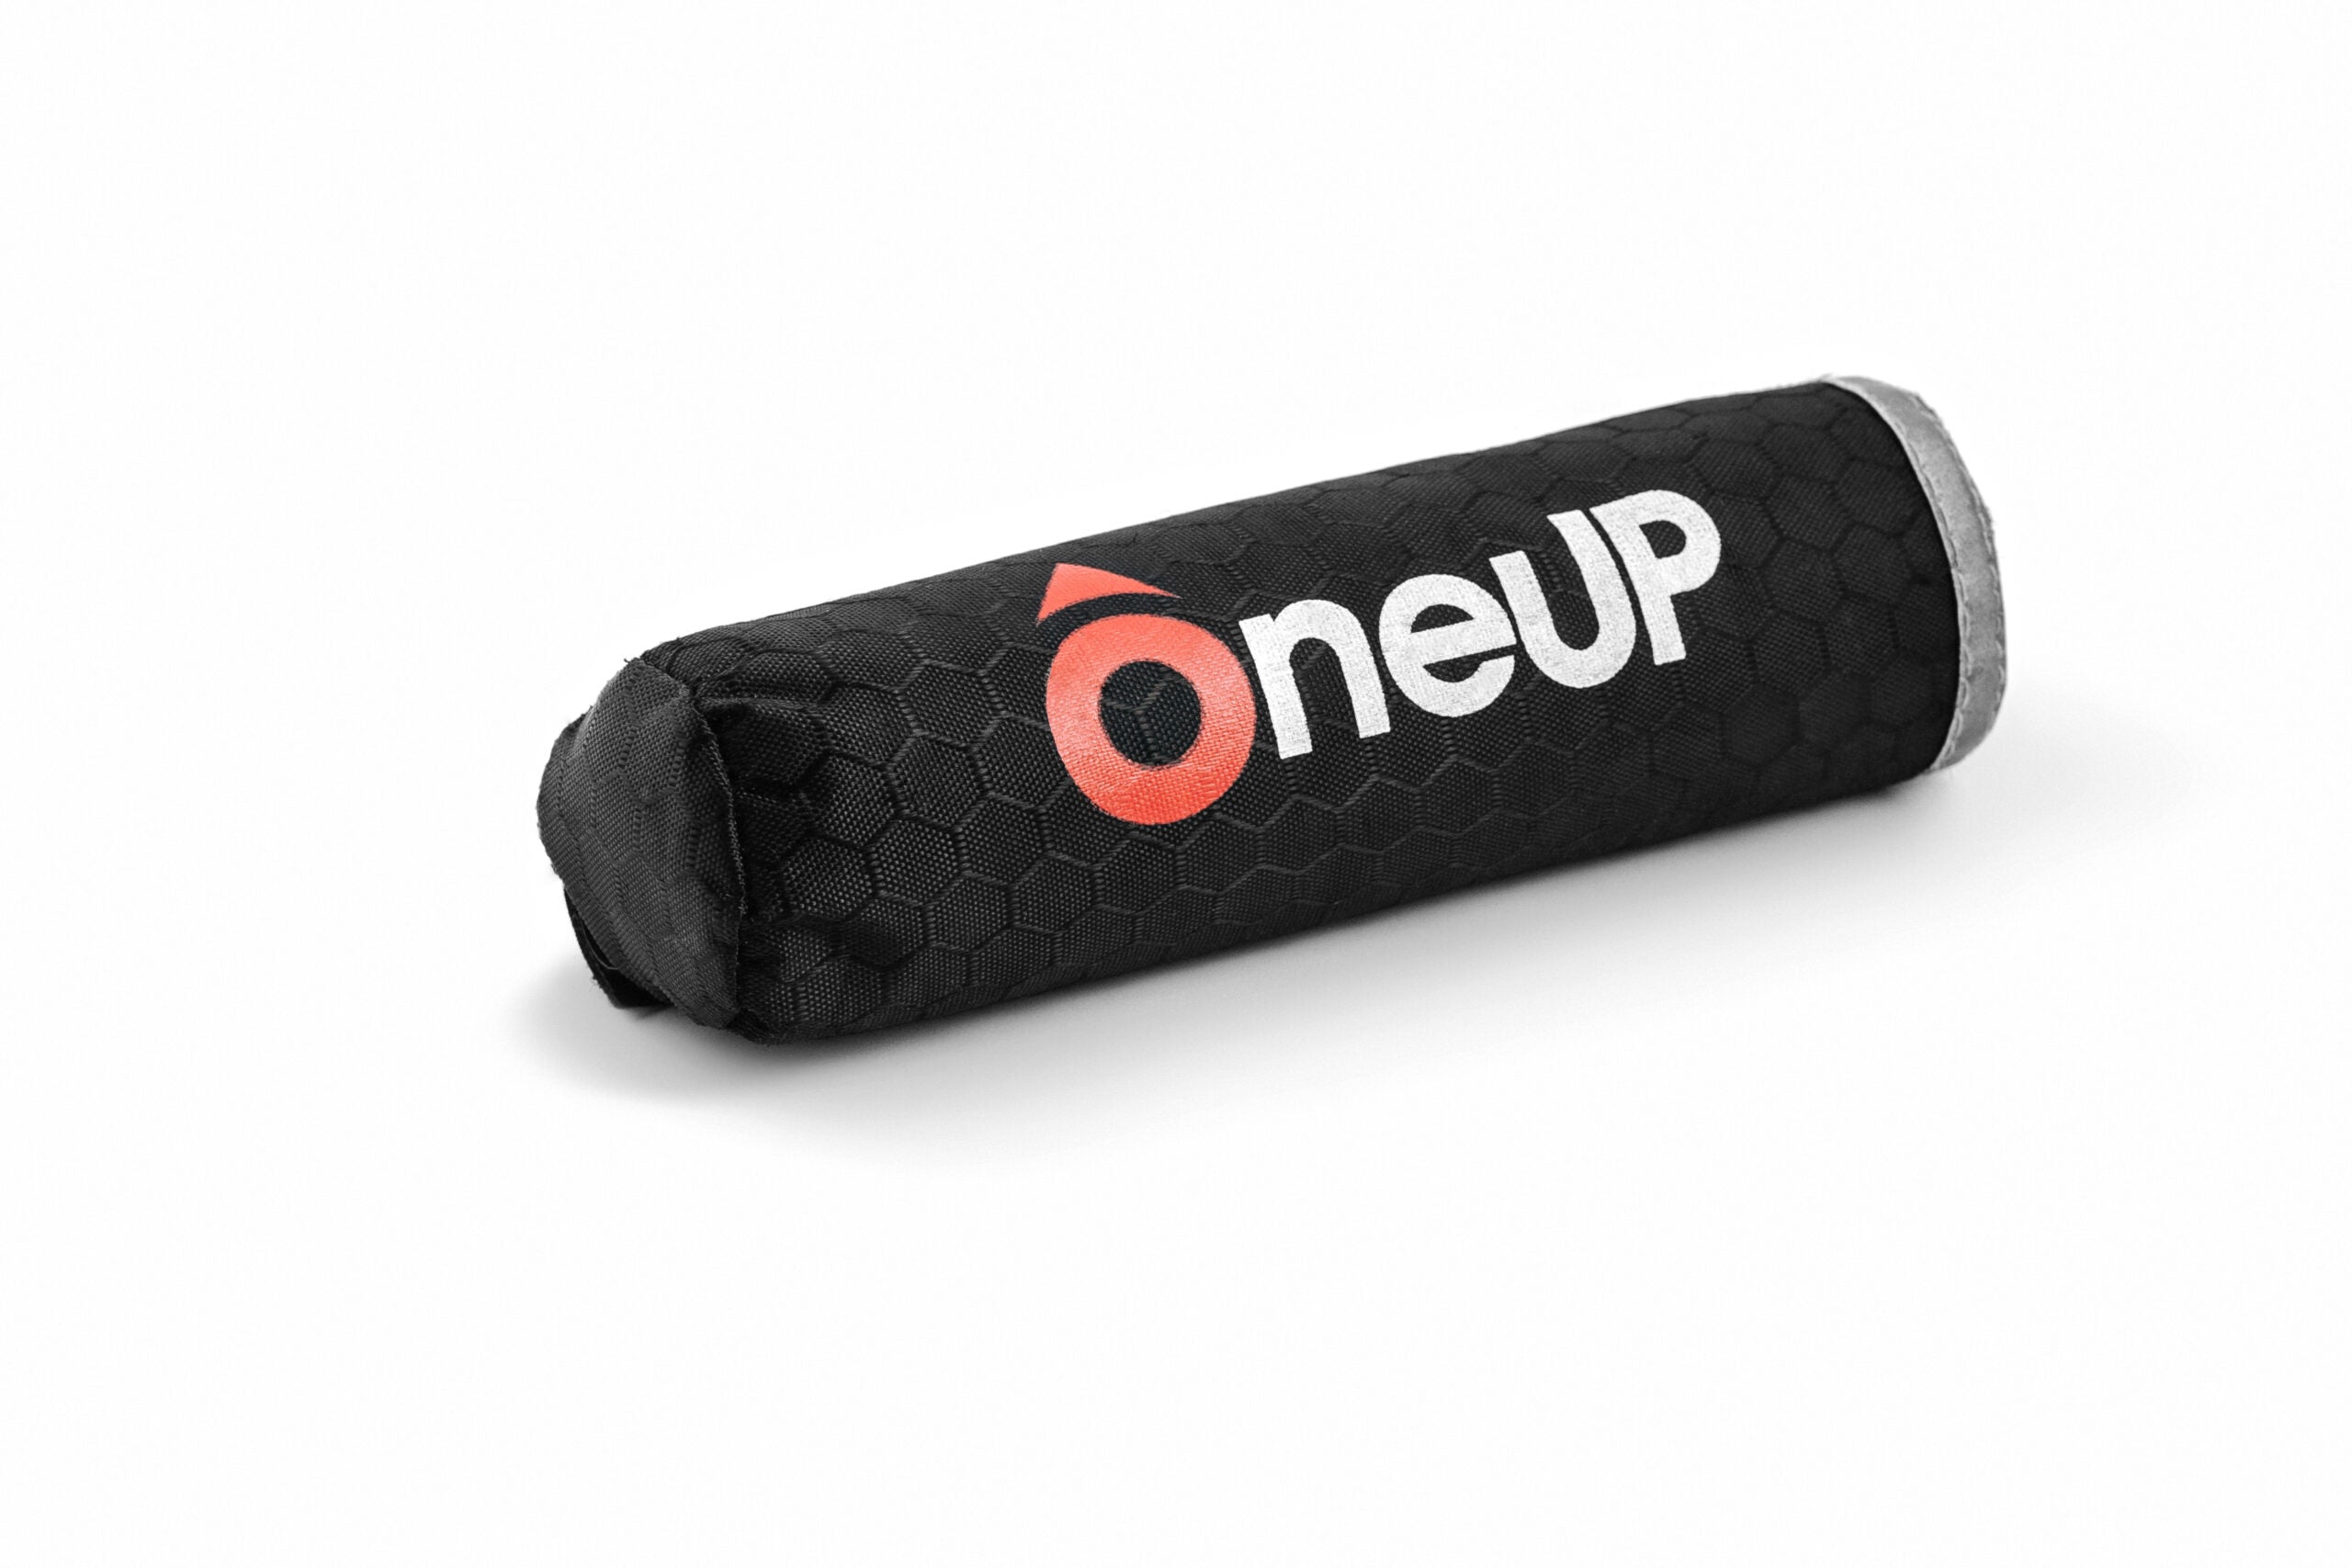 OneUP